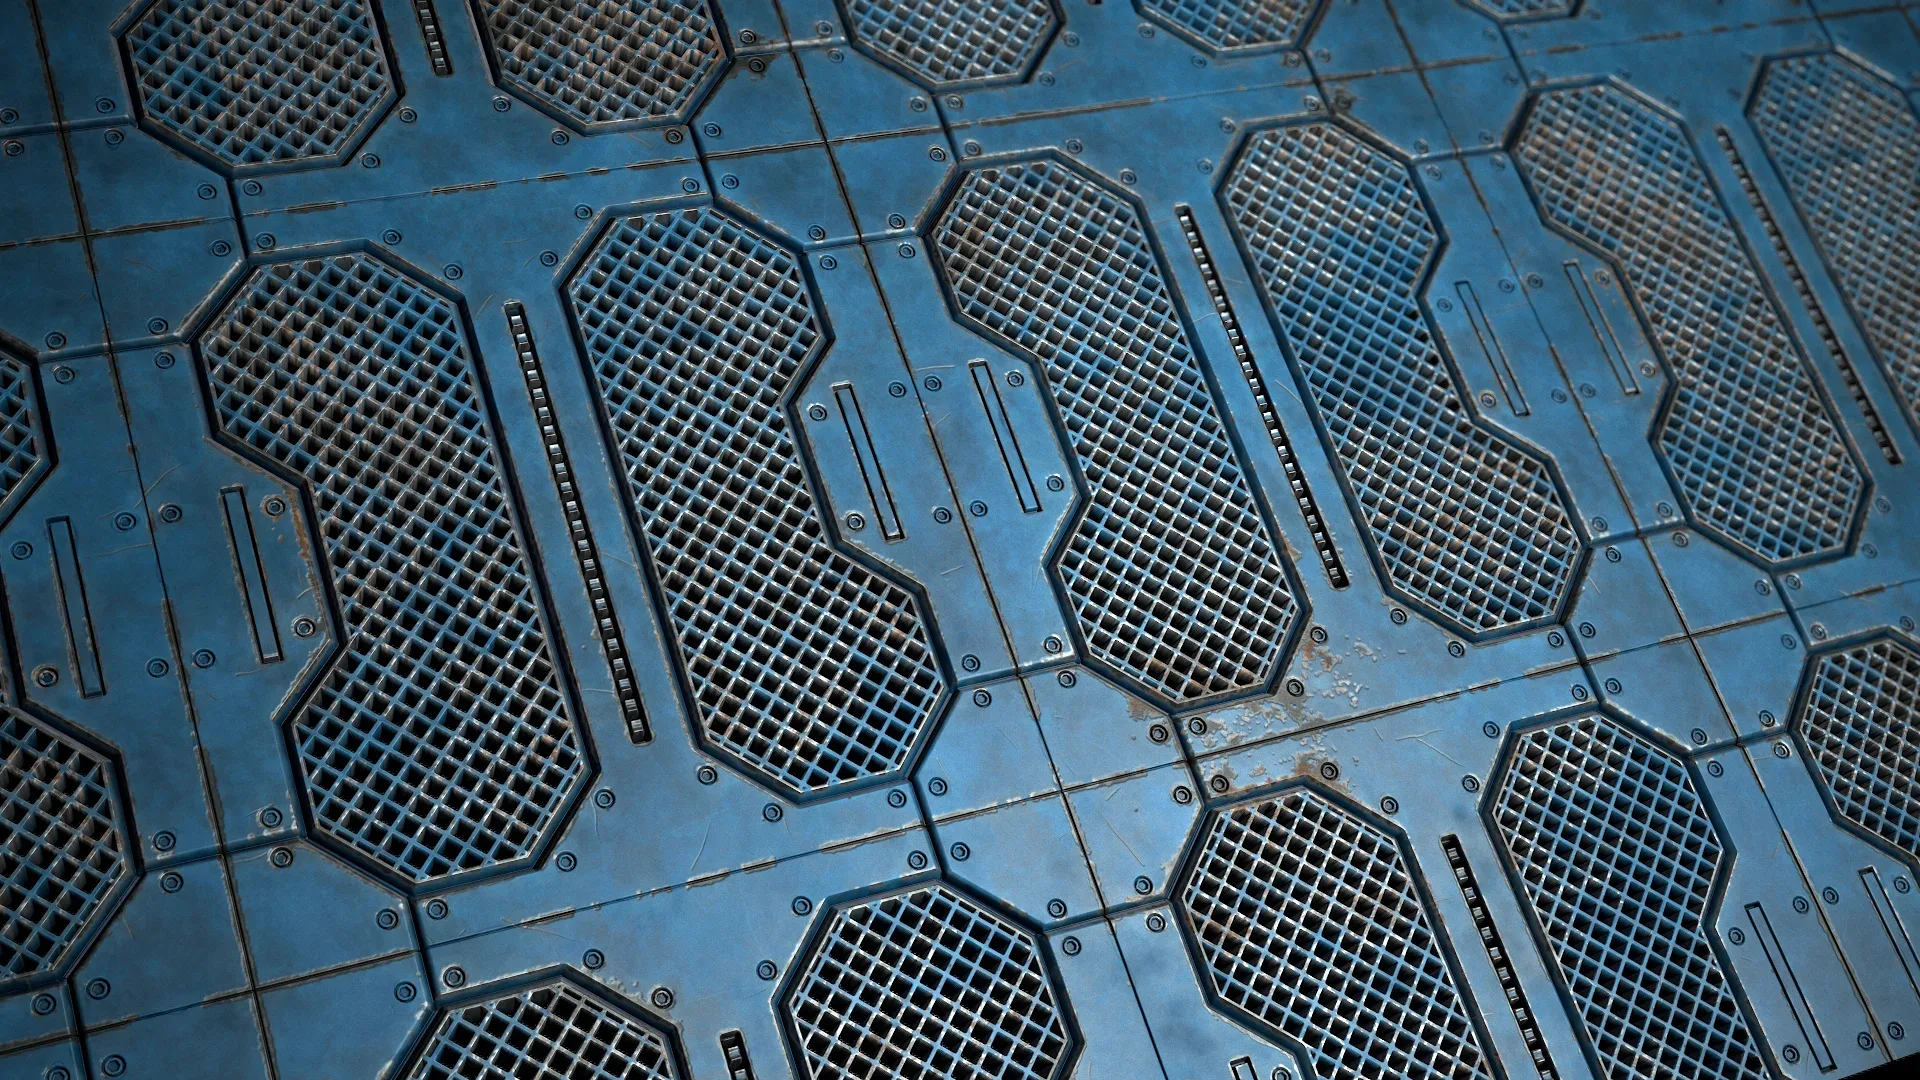 15 sci fi painted grating tiles